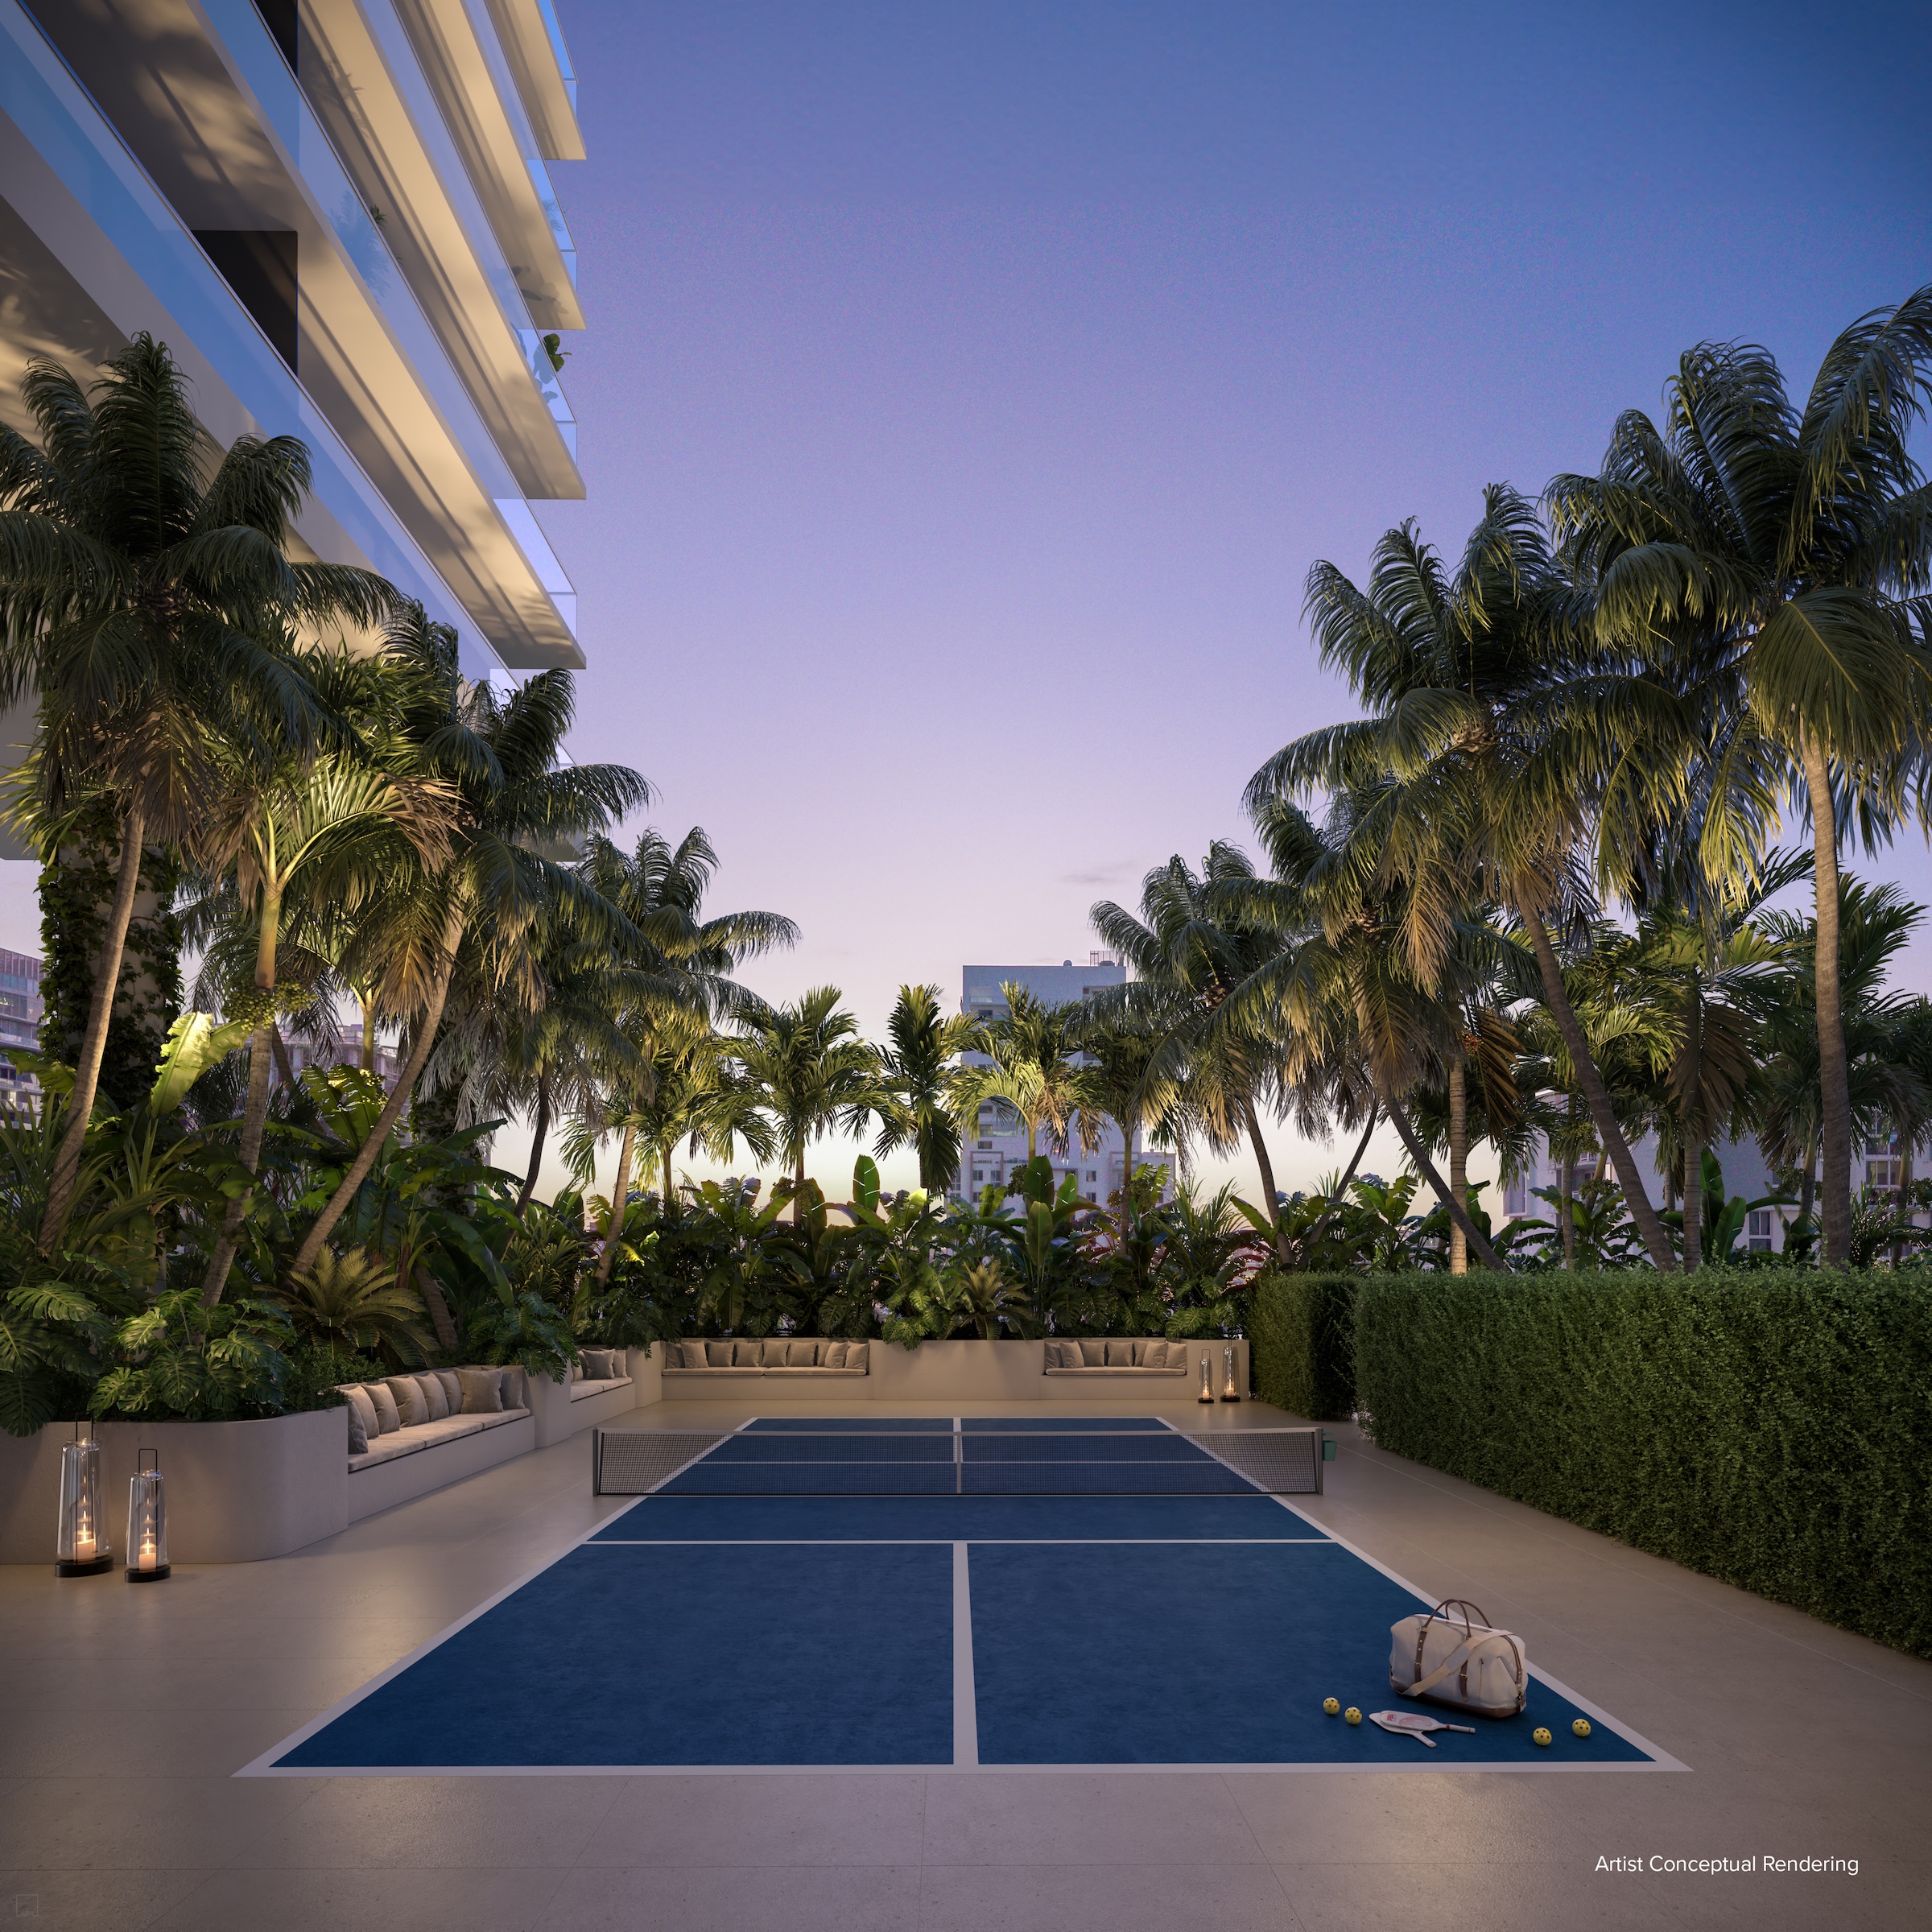 Miami's One Twenty Brickell Residences condo tower provides deeded office unit for every buyer. Rendering ARX Creative